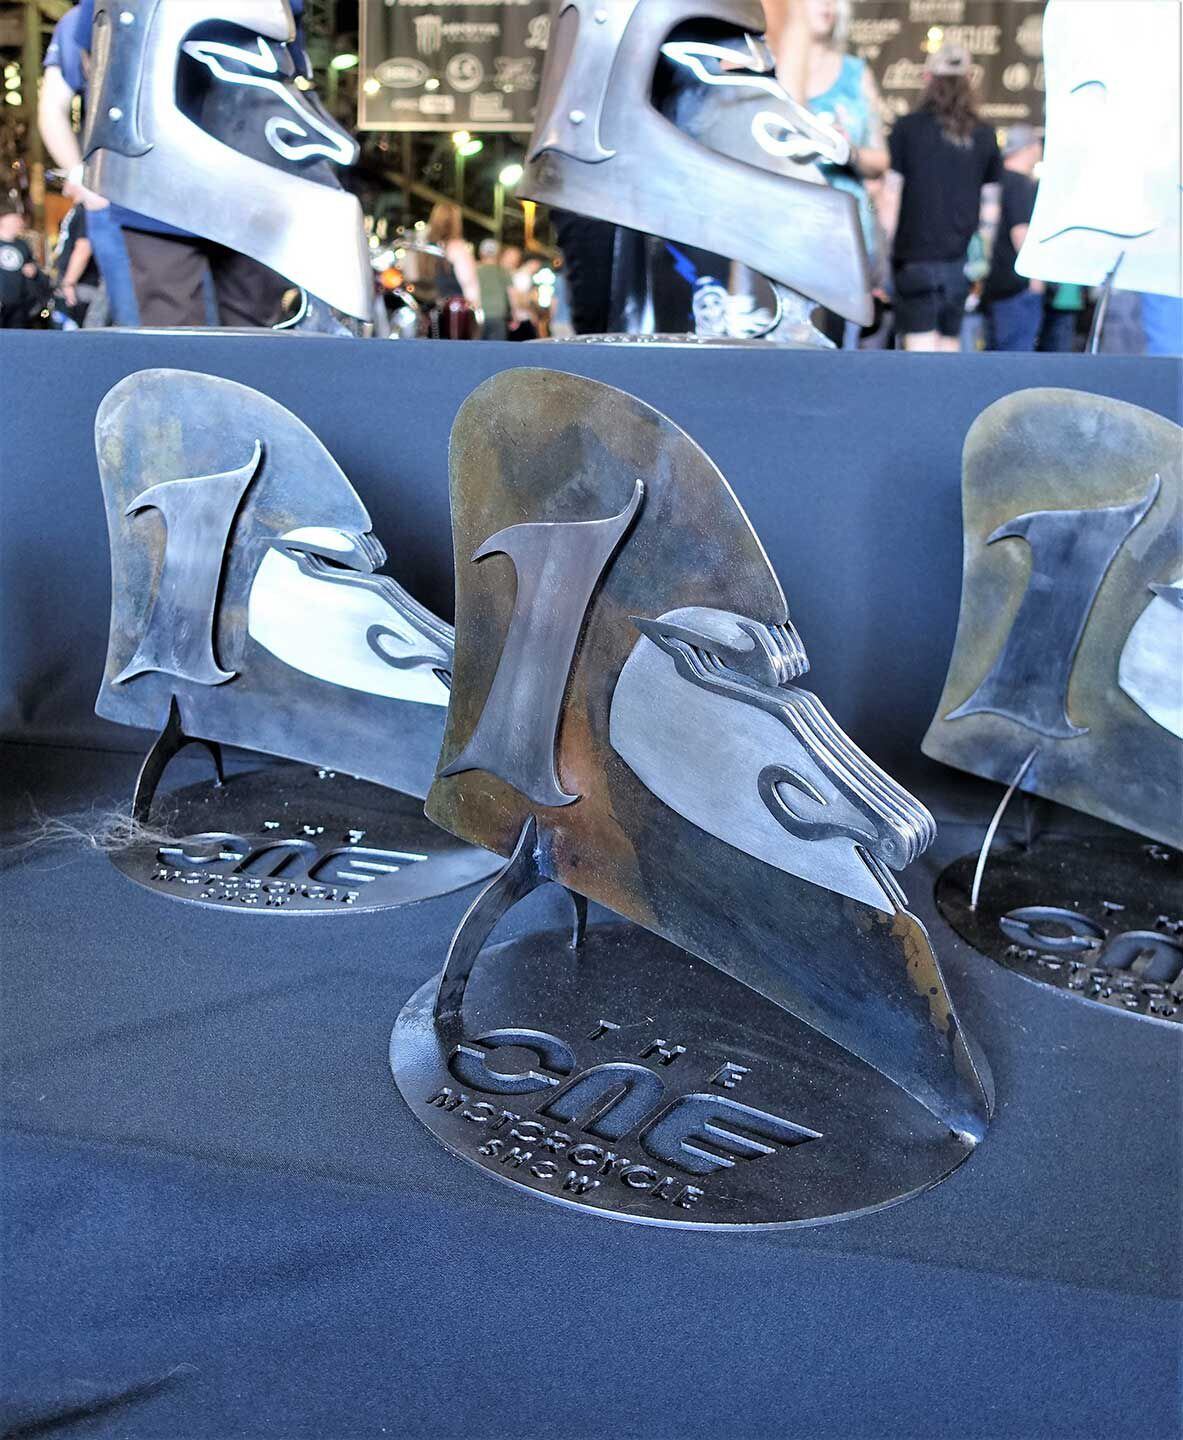 Every year the One Show gives out handmade custom trophies; for 2023 it was these welded beauties.